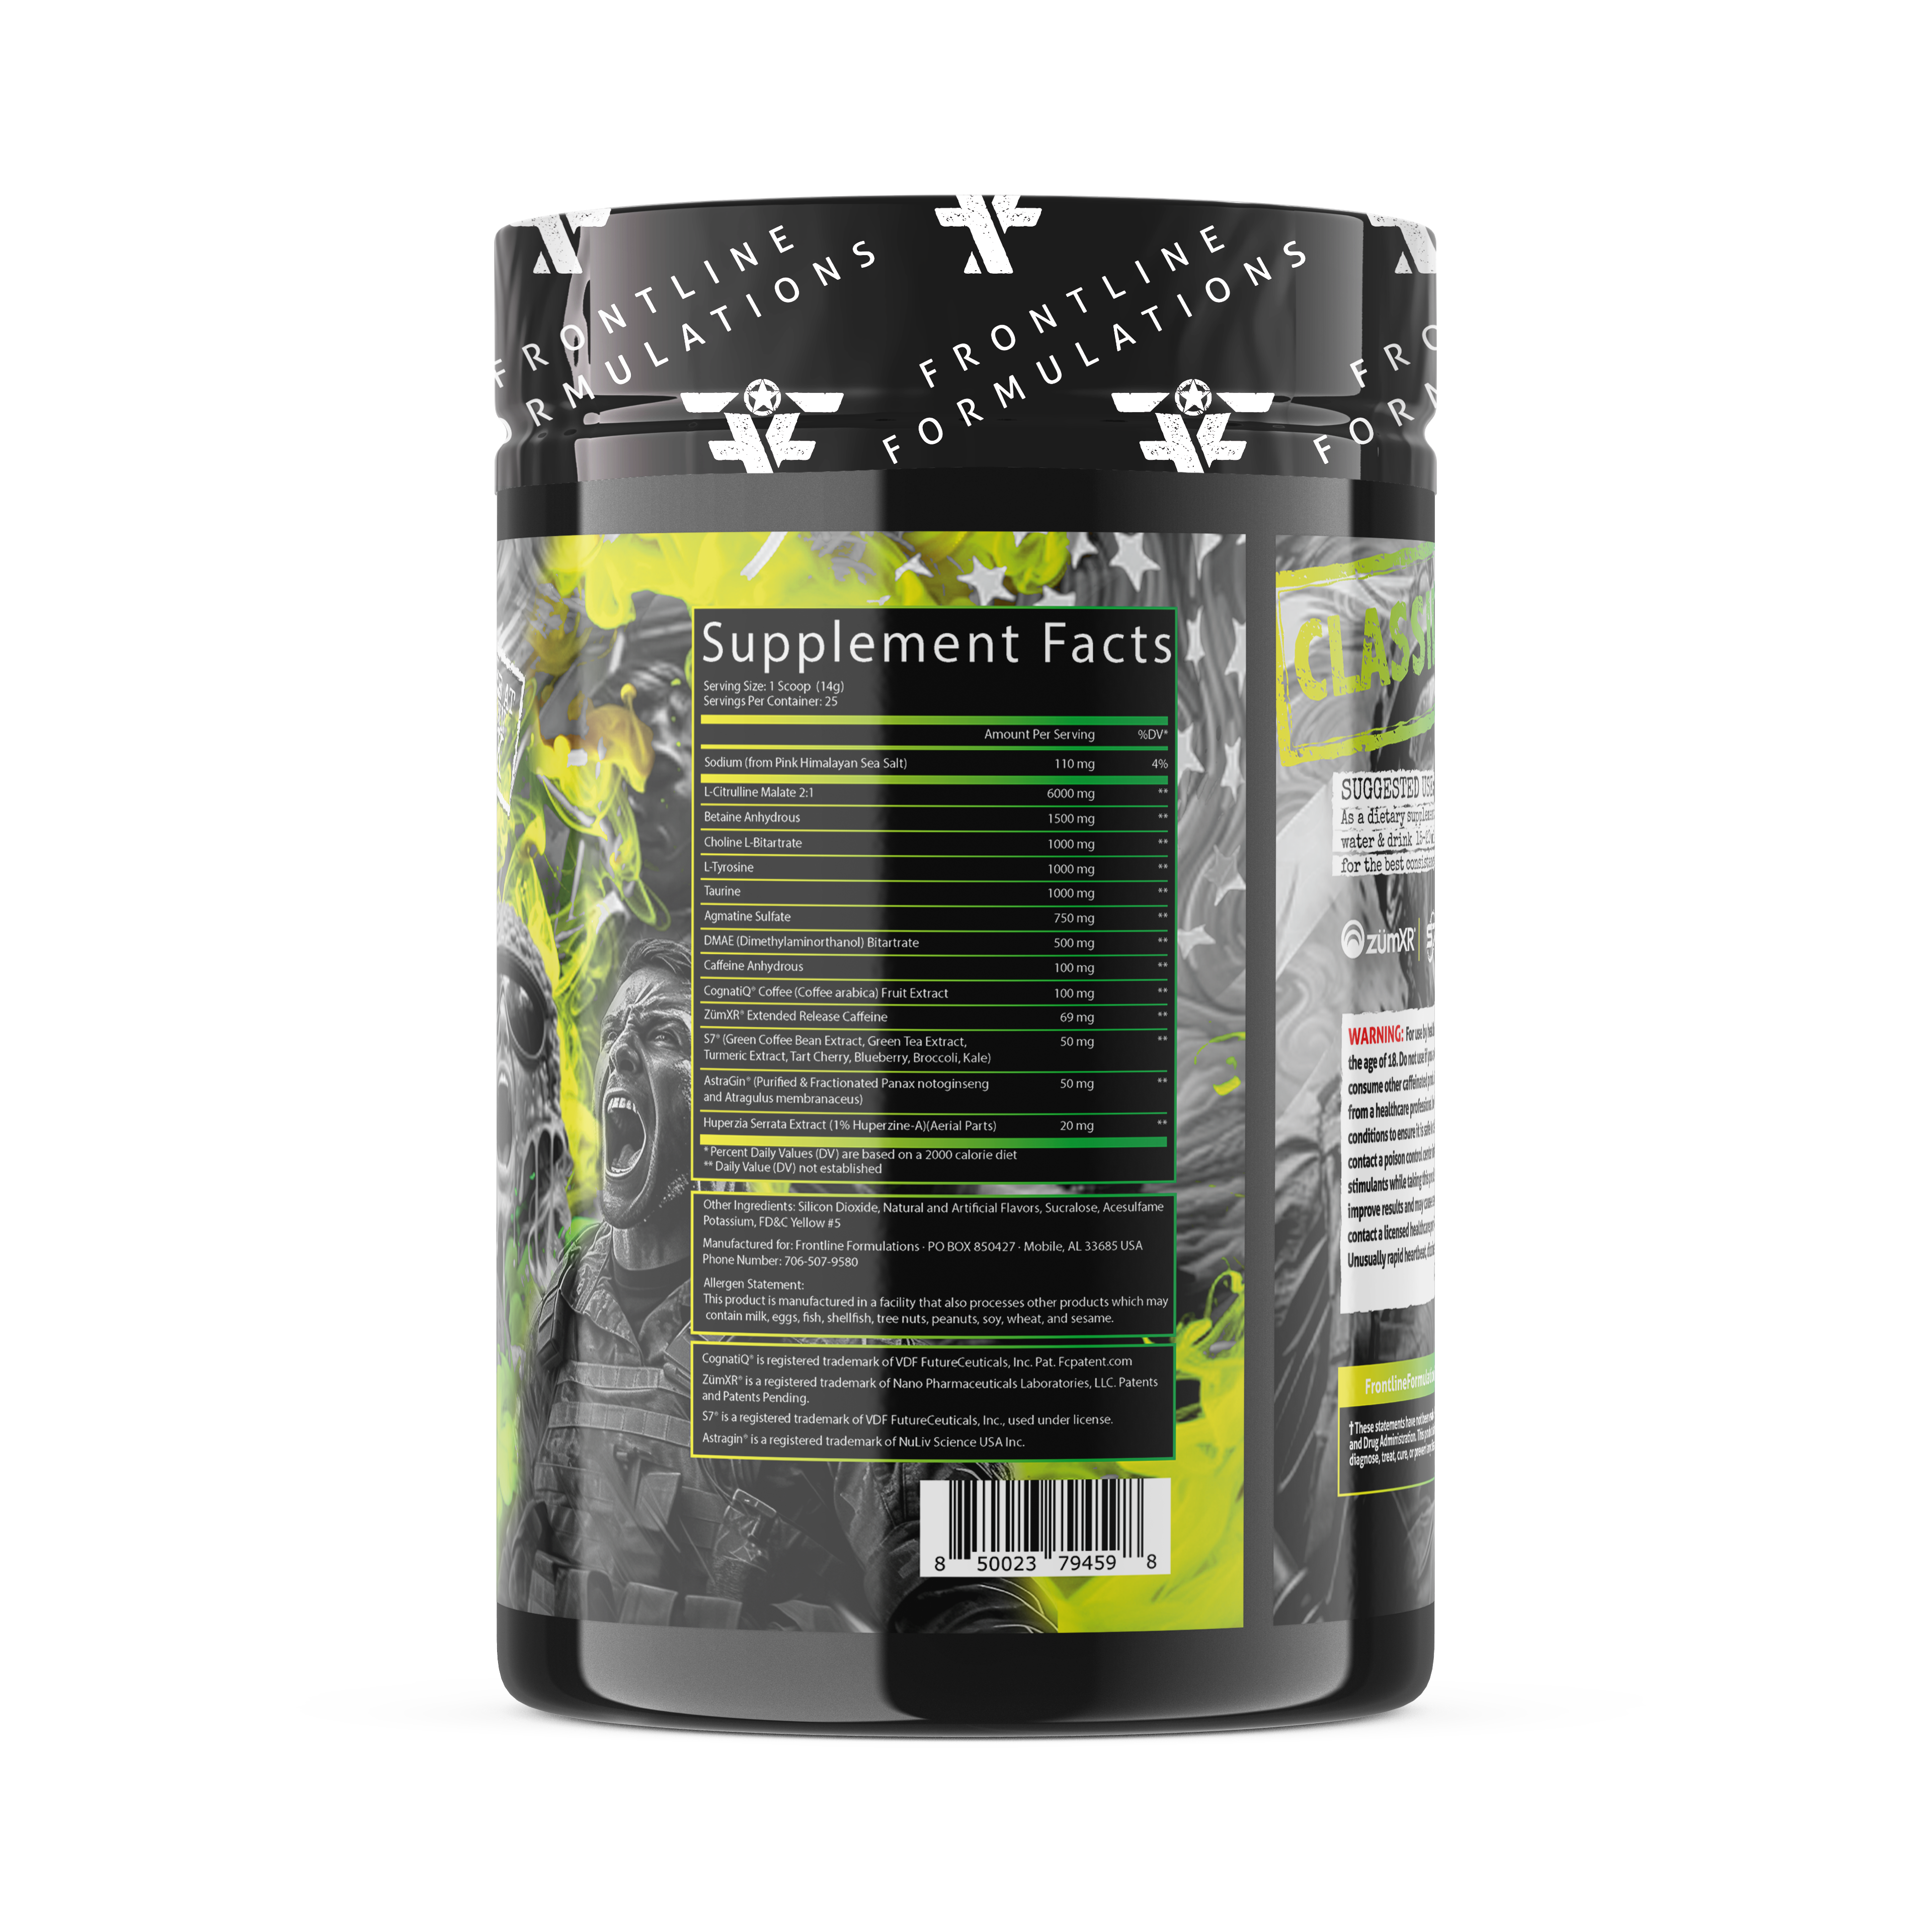 Operation Delirium: Experimental Nootropic Preworkout Introducing Operation Delirium, the cutting-edge preworkout designed for warriors seeking an unparalleled boost in performance and focus. This military-grade experimental formula combines the power of